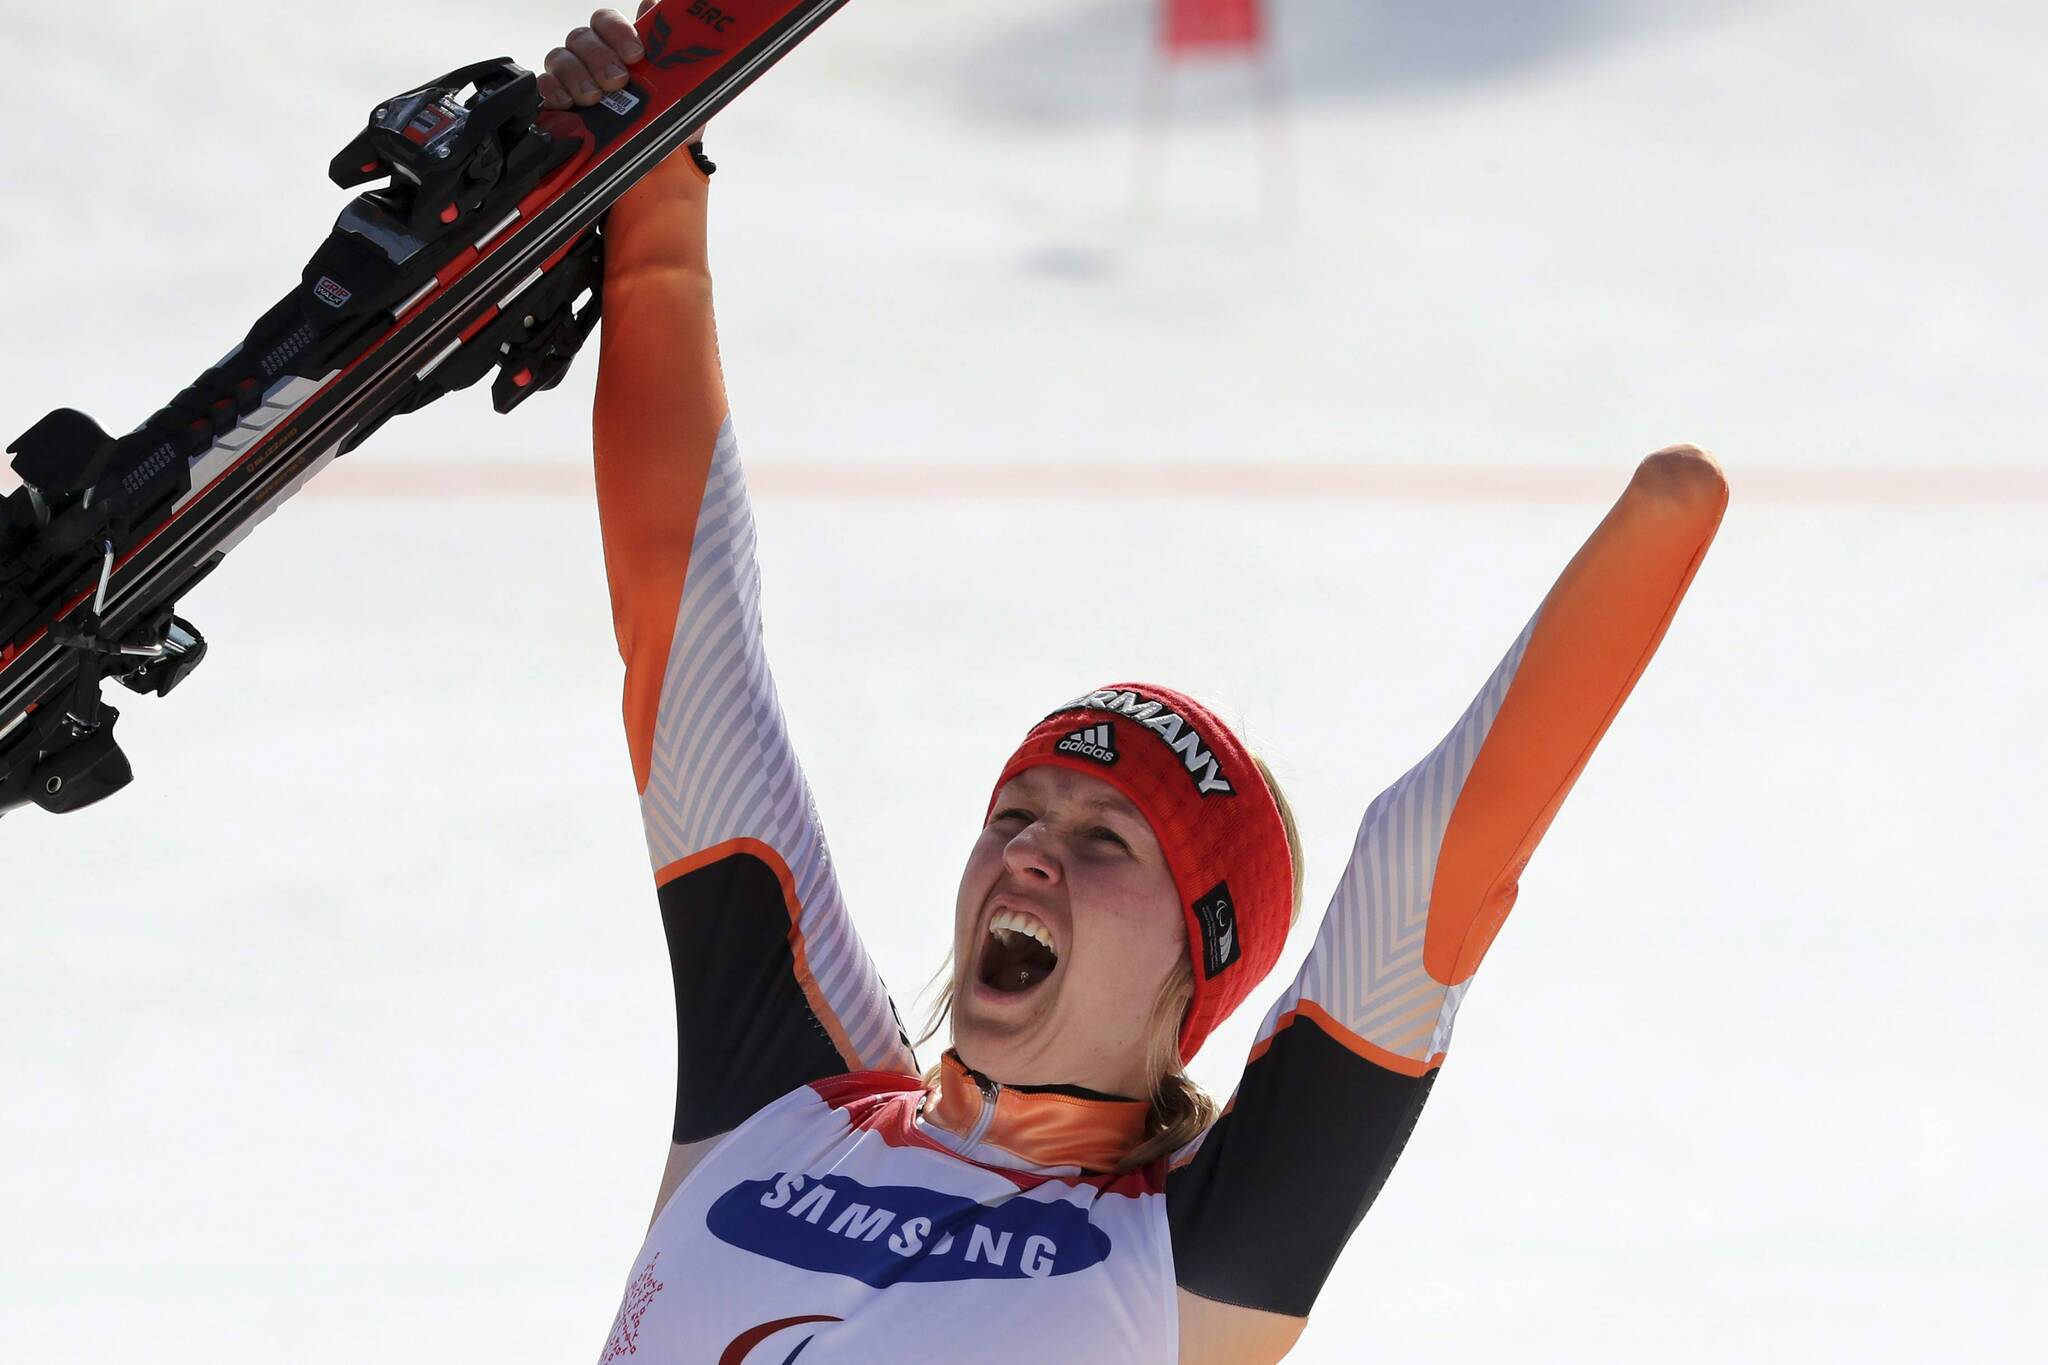 This 2018 file photo shows Mollie Jepson celebrating at the Paralympics in at the Jeongseon Alpine Center in Jeongseon, South Korea. (AP Photo/Ng Han Guan)